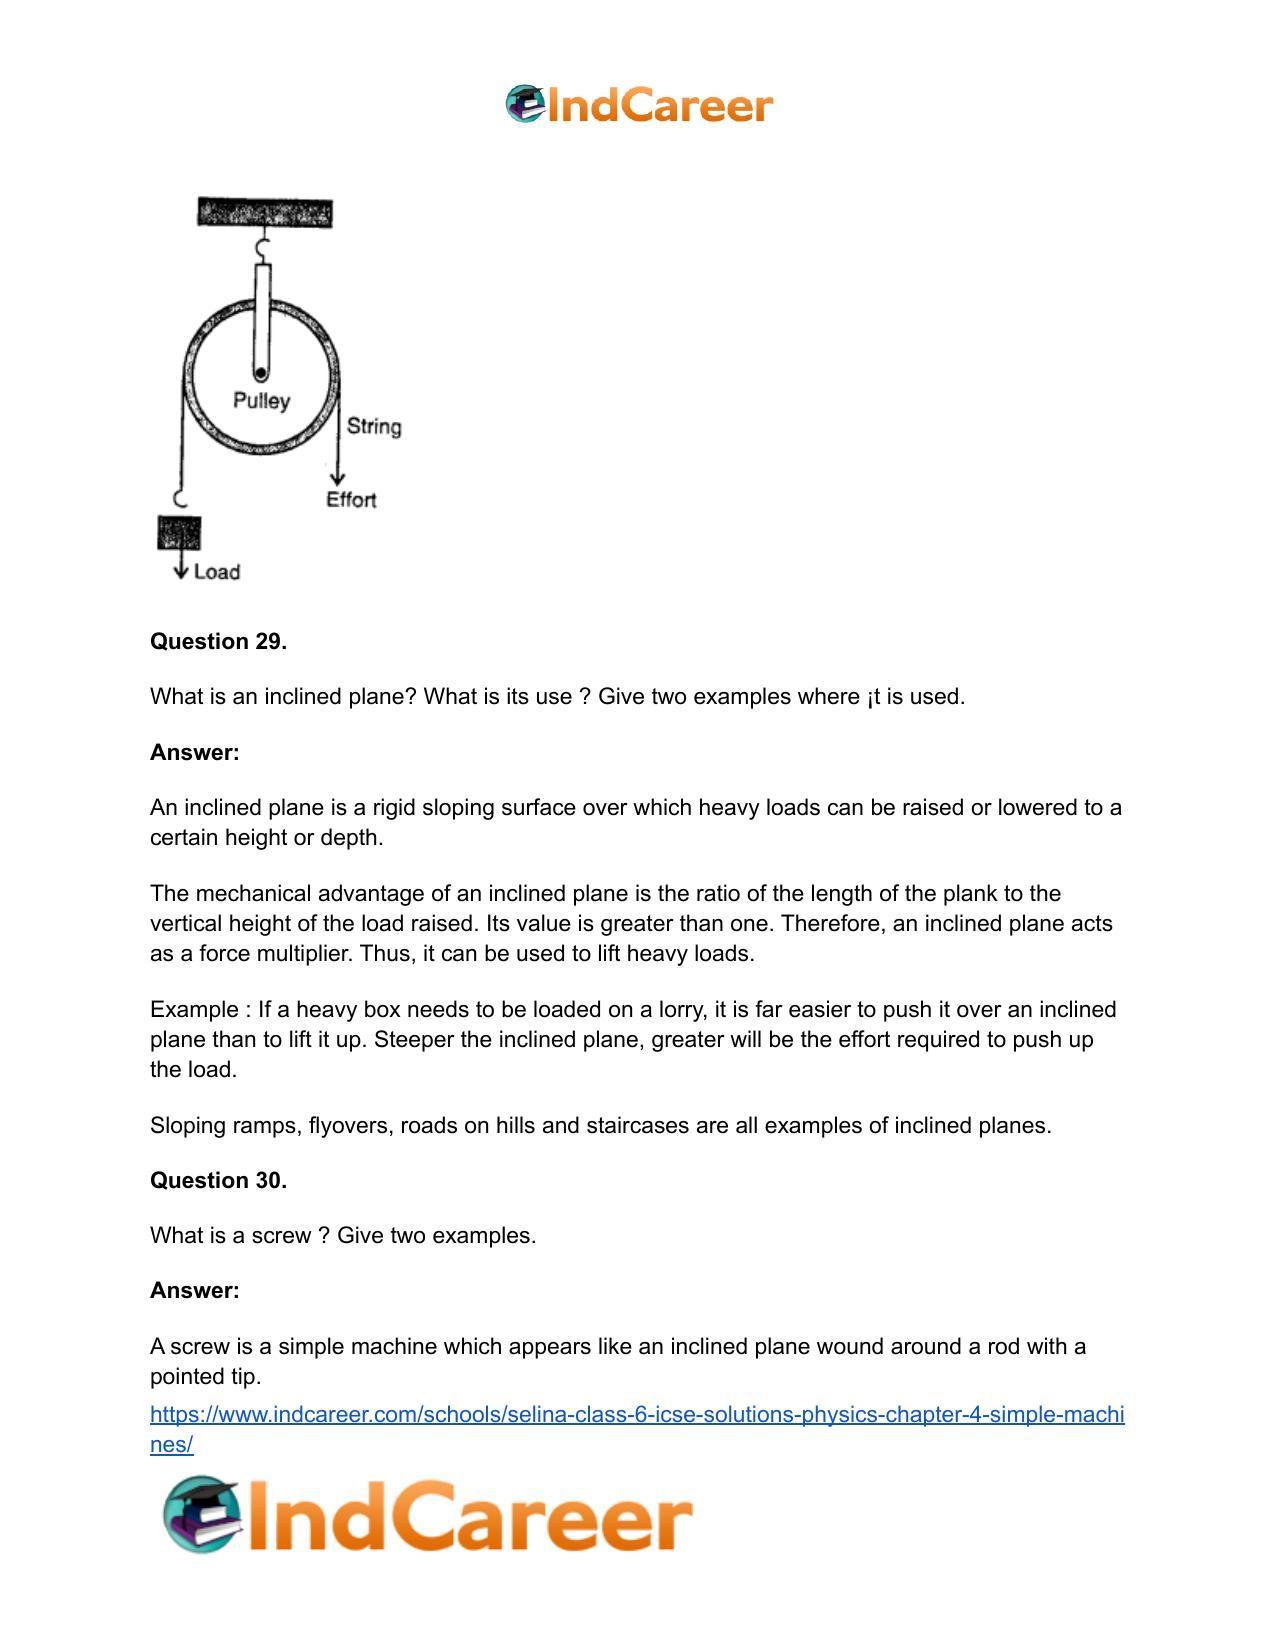 Selina Class 6 ICSE Solutions Physics : Chapter 4- Simple Machines - Page 17